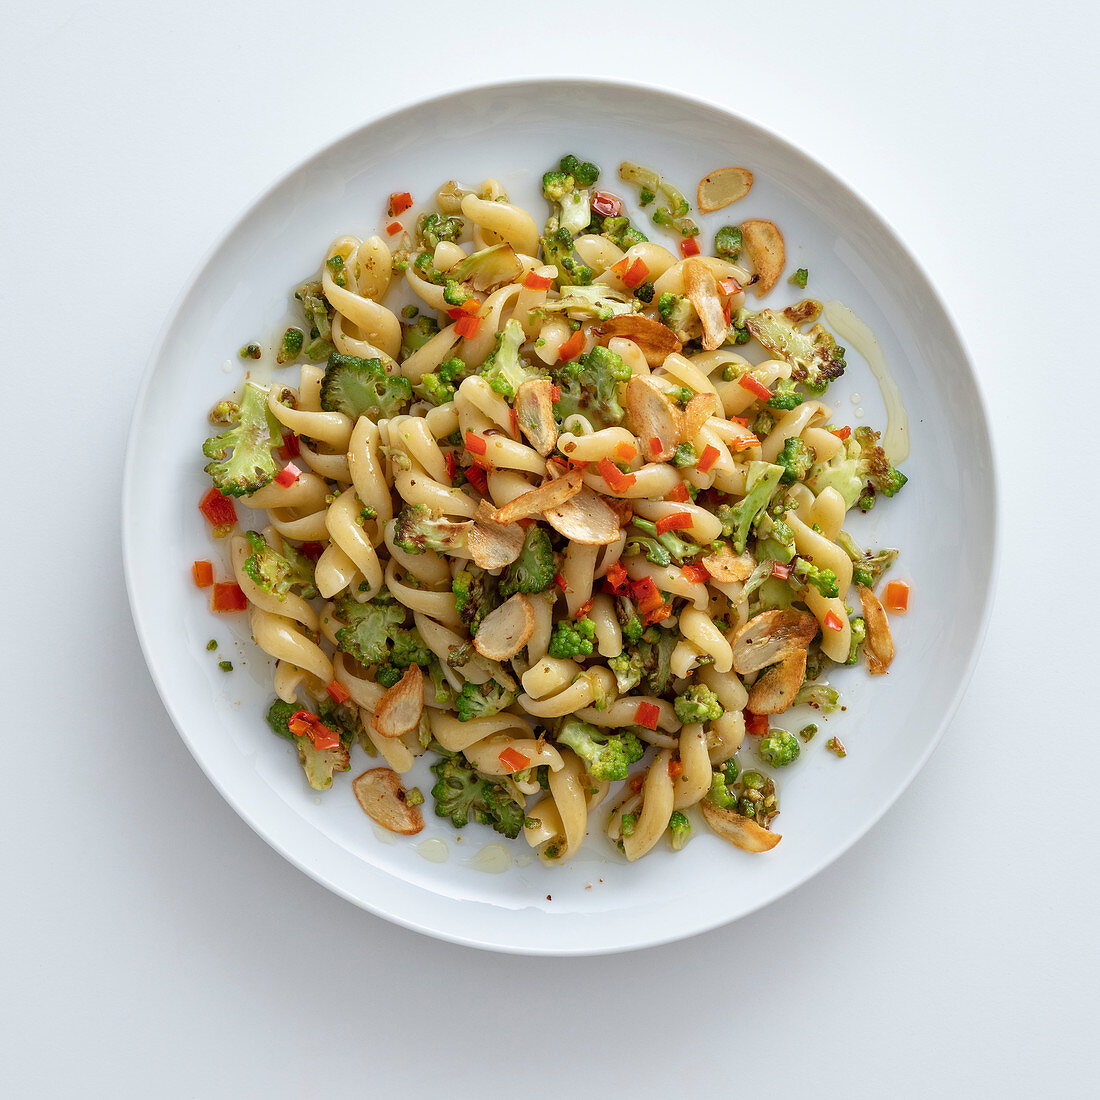 Fusilli with romanesco broccoli and red peppers